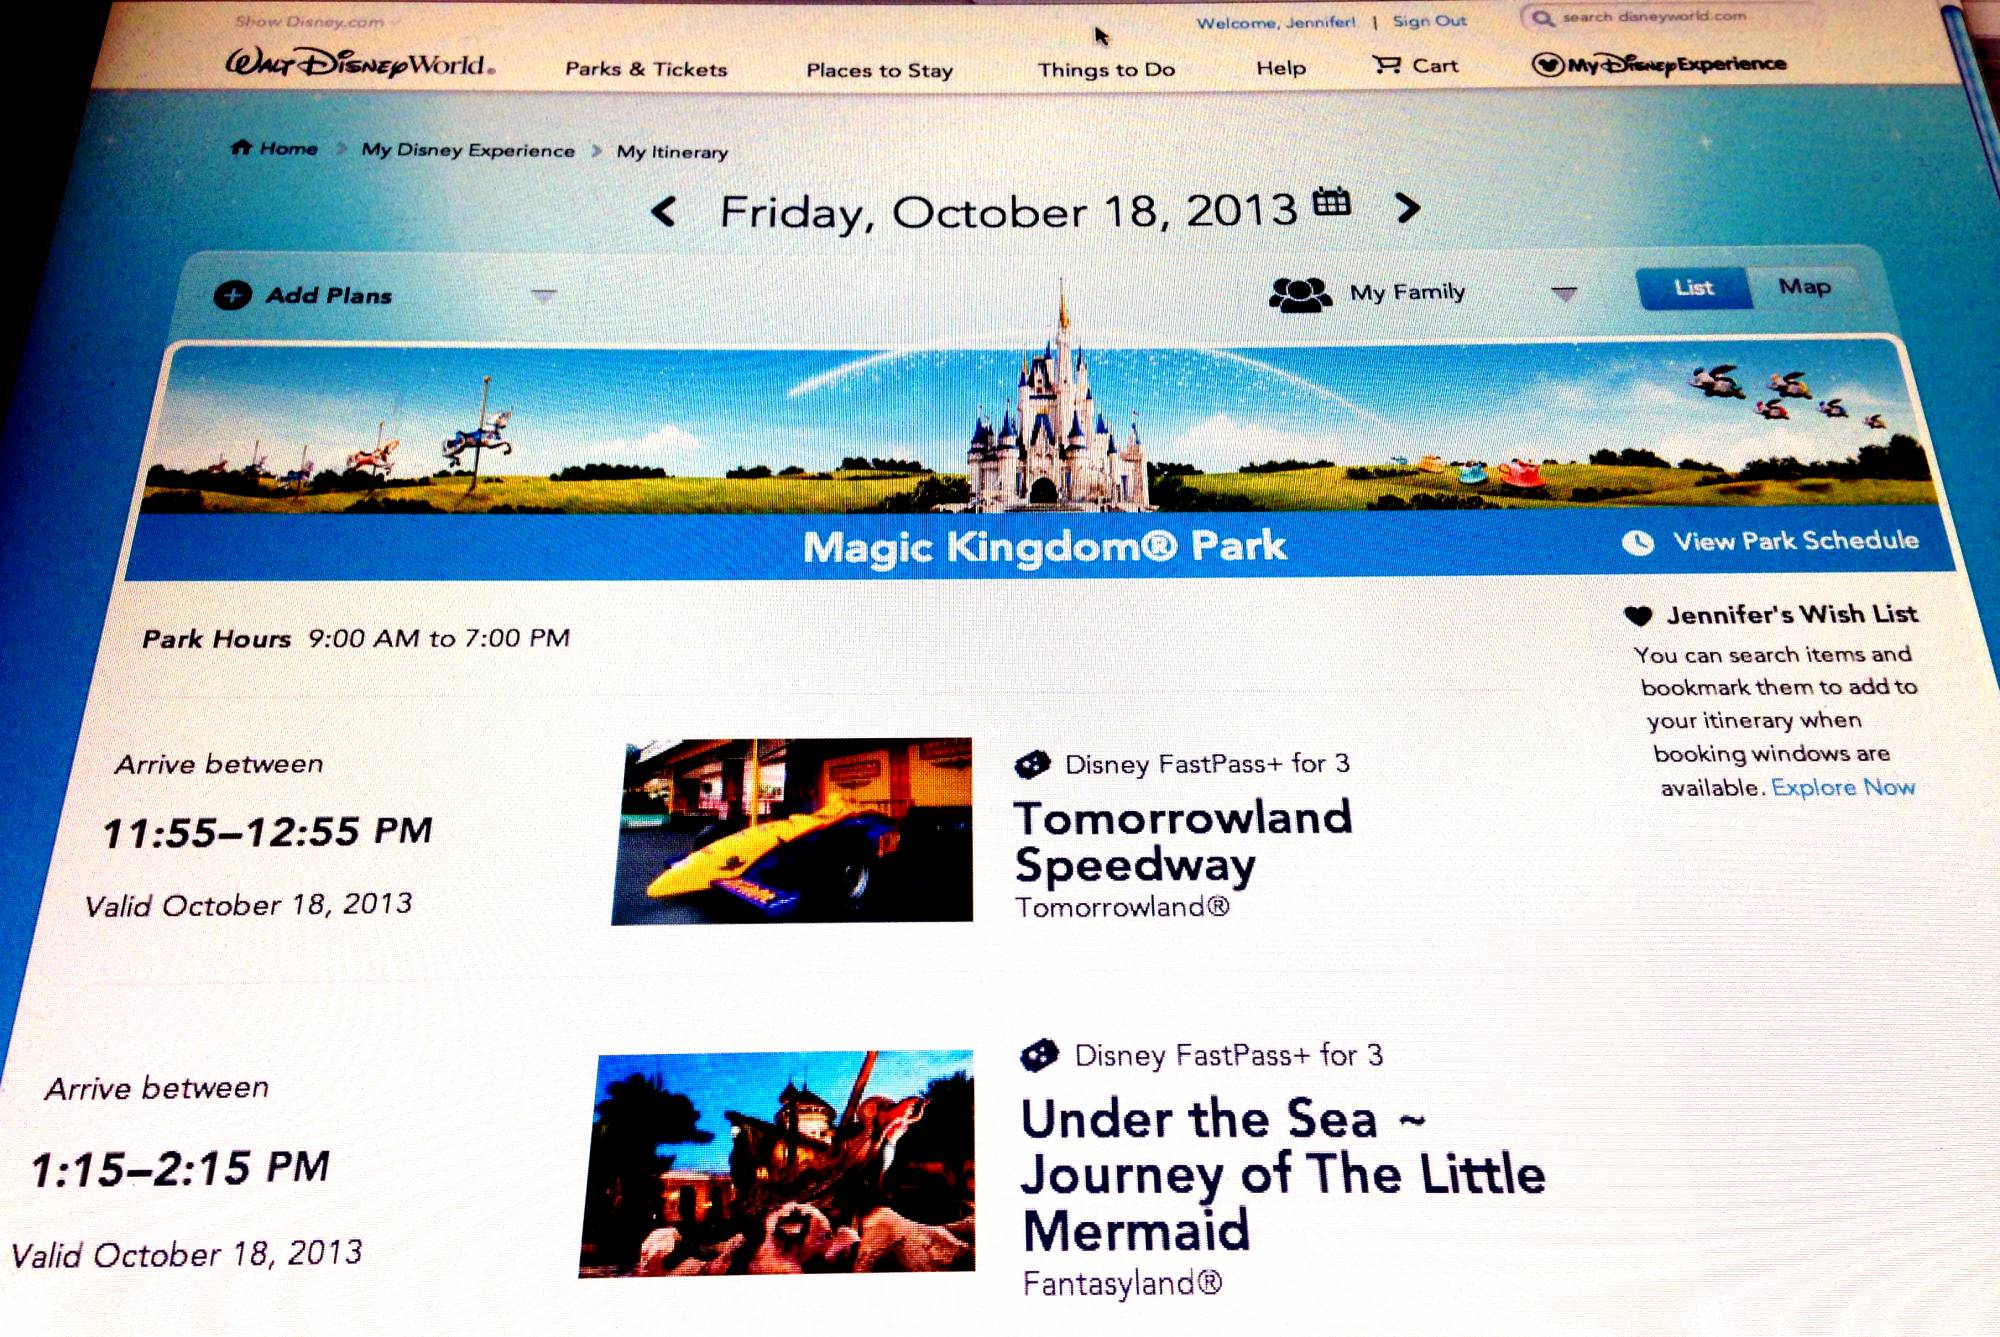 Discover which apps can help make planning your Walt Disney World vacation easier | PassPorter.com